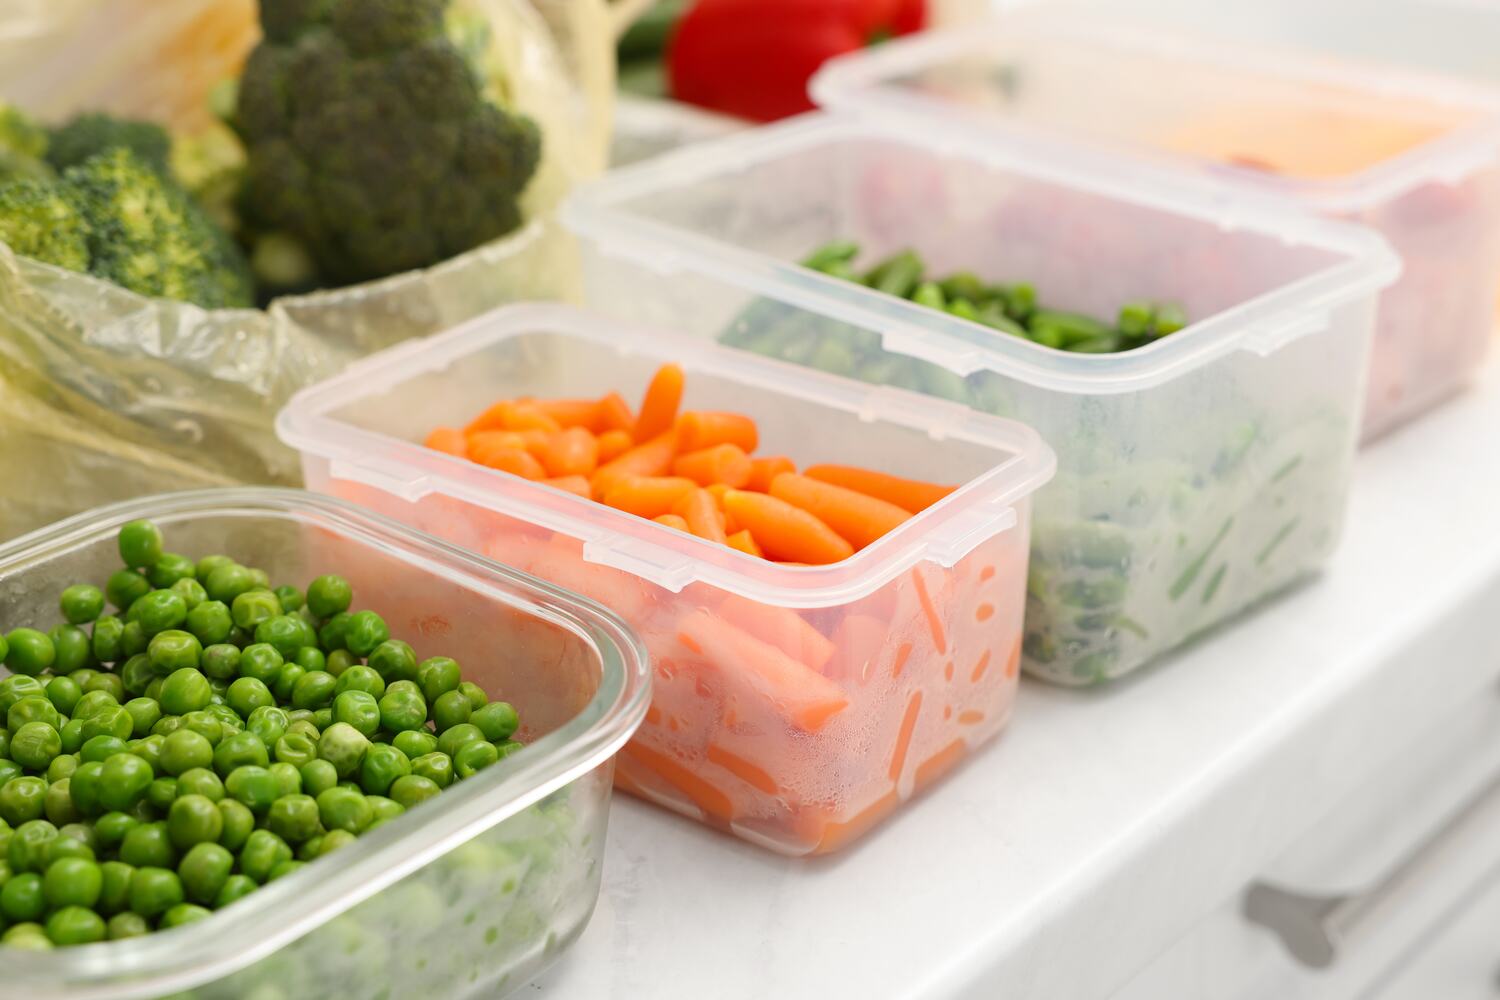 Vegetables like peas, carrots etc. are good travel foods for toddlers